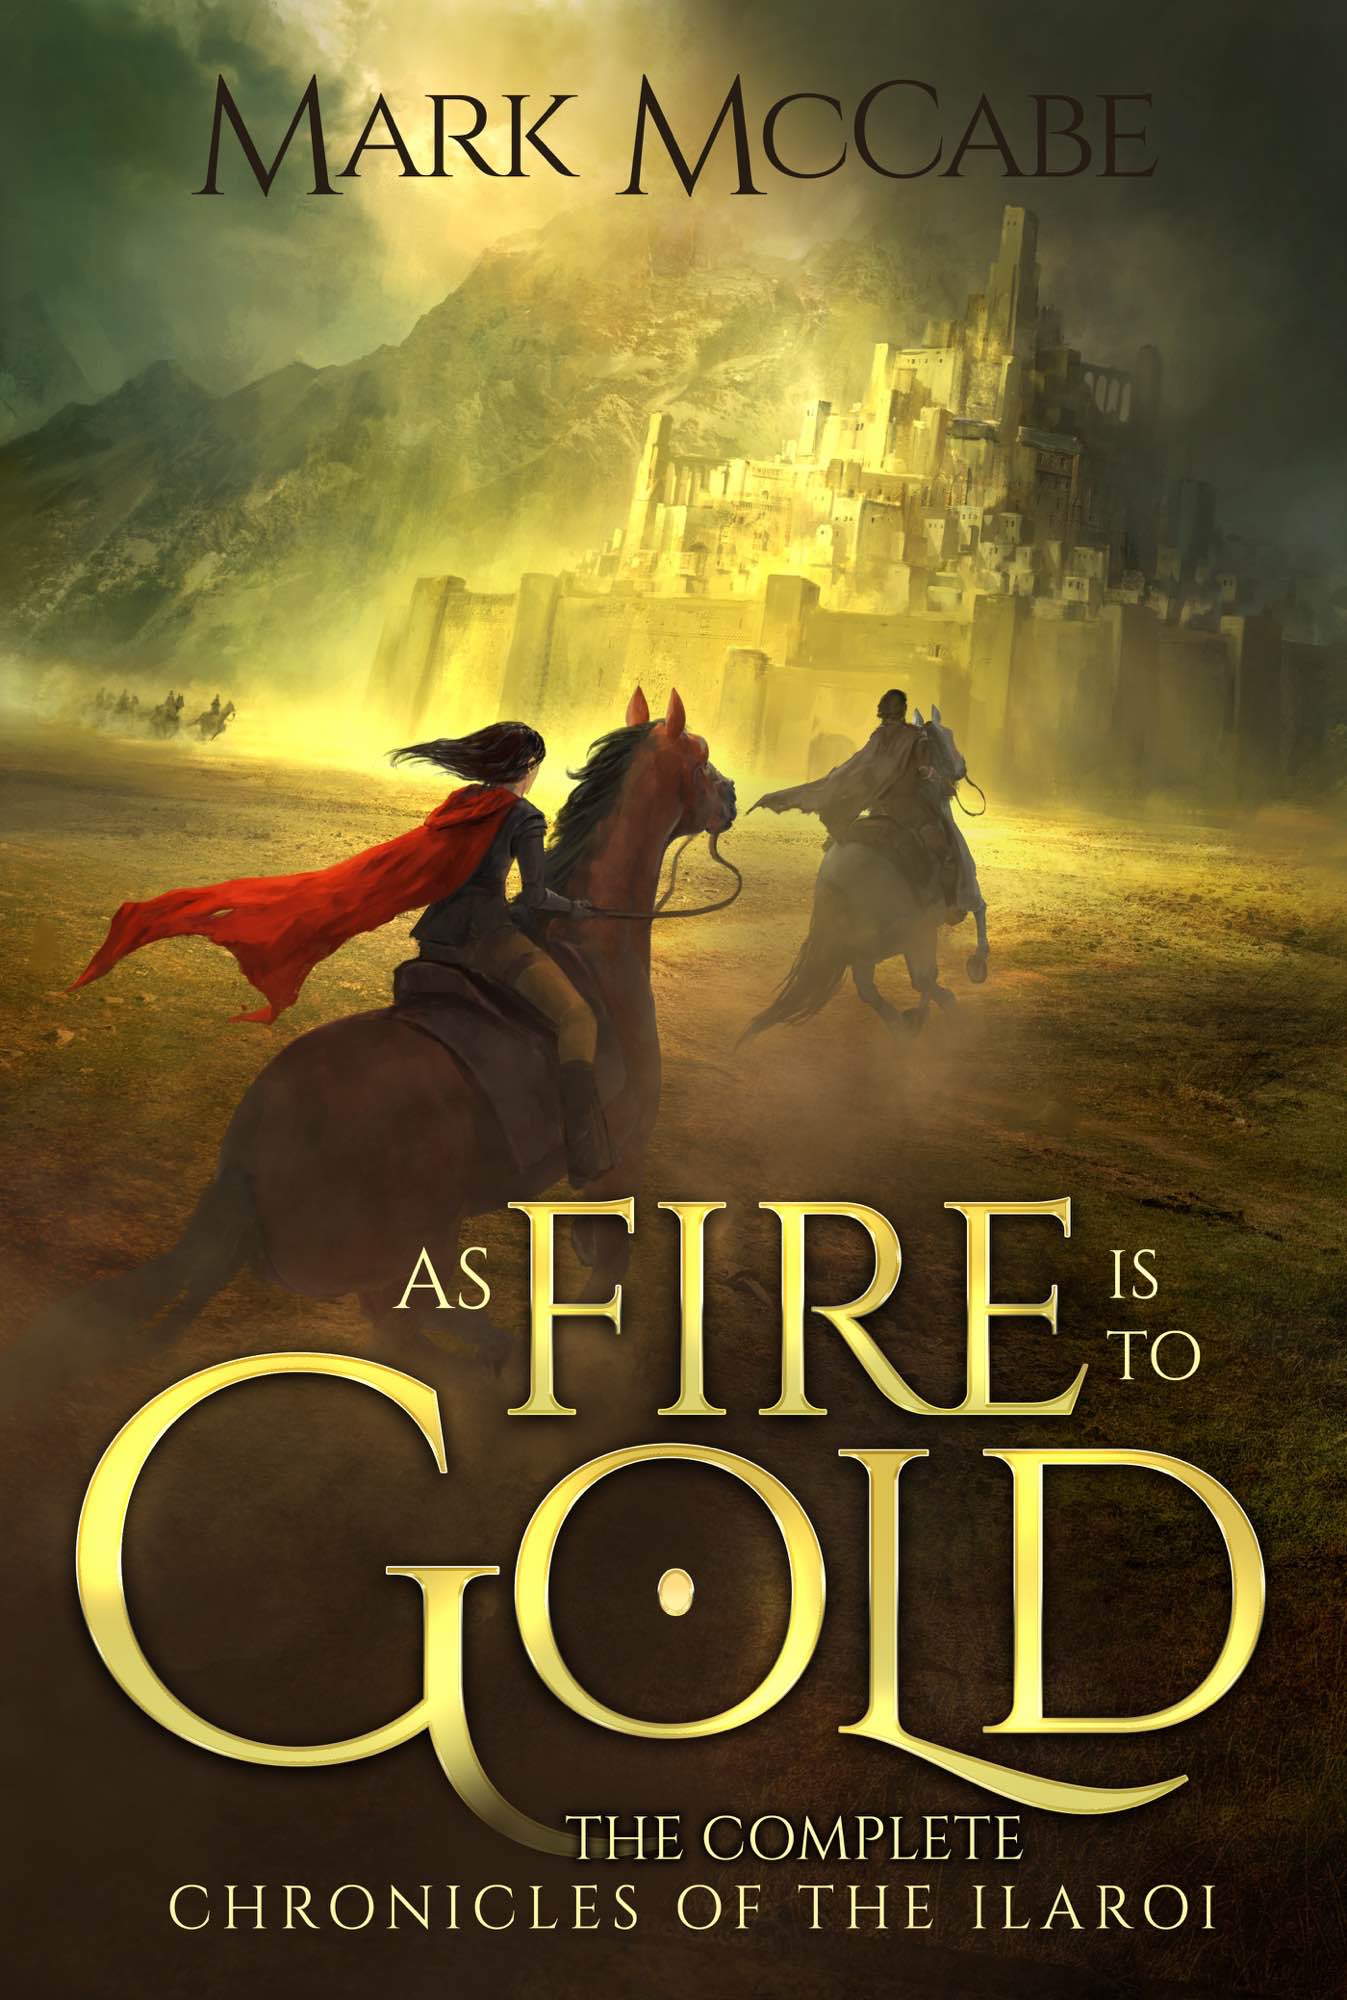 FREE: As Fire is to Gold: The Complete Chronicles of the Ilaroi by Mark McCabe